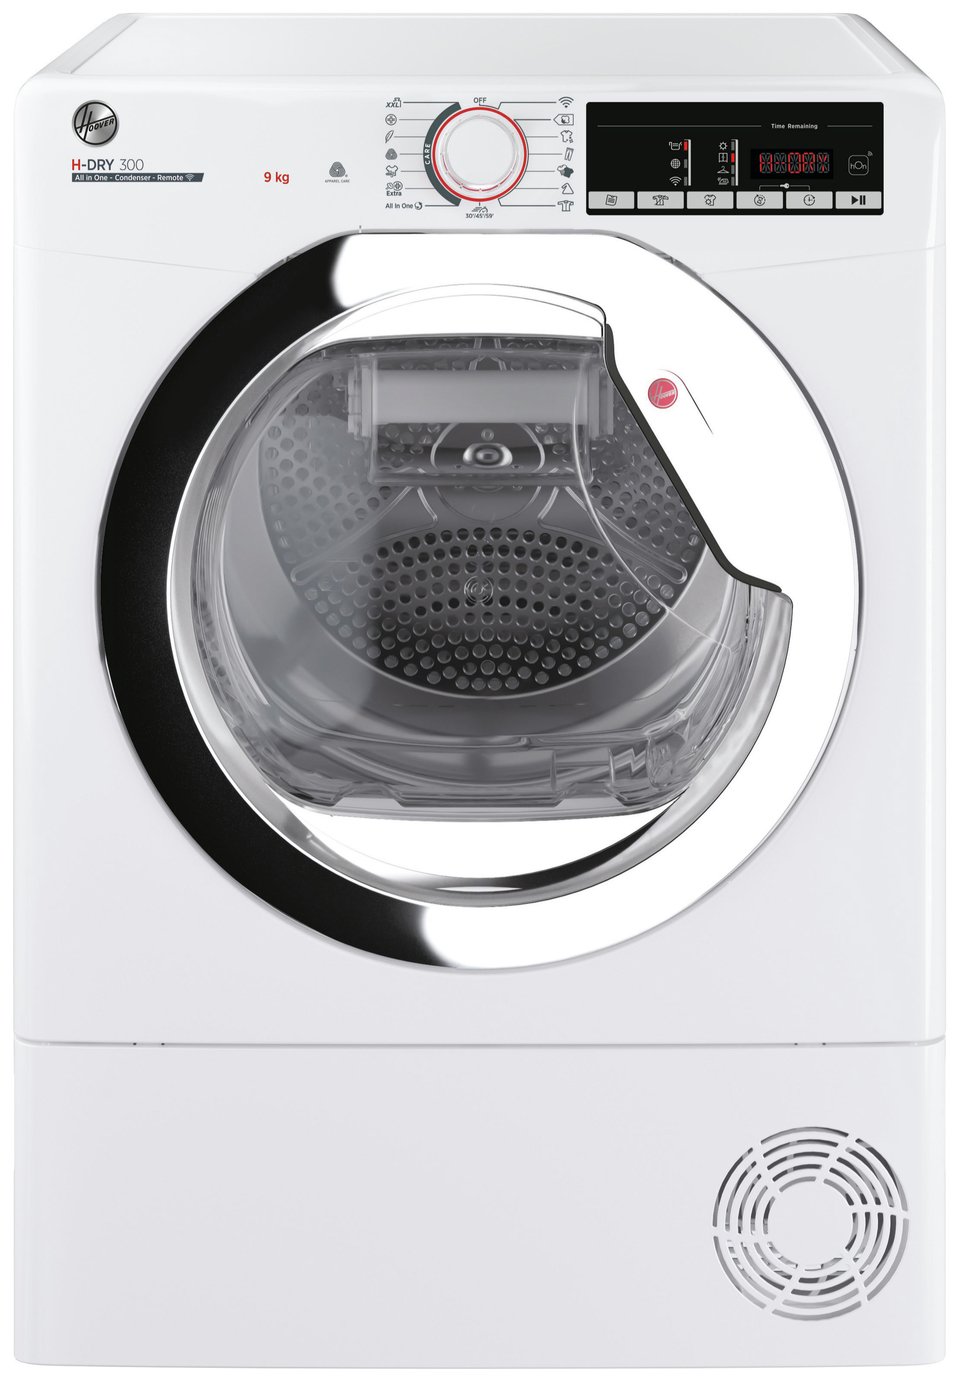 Hoover HLE C9TCE-80 9KG Condenser Tumble Dryer - White